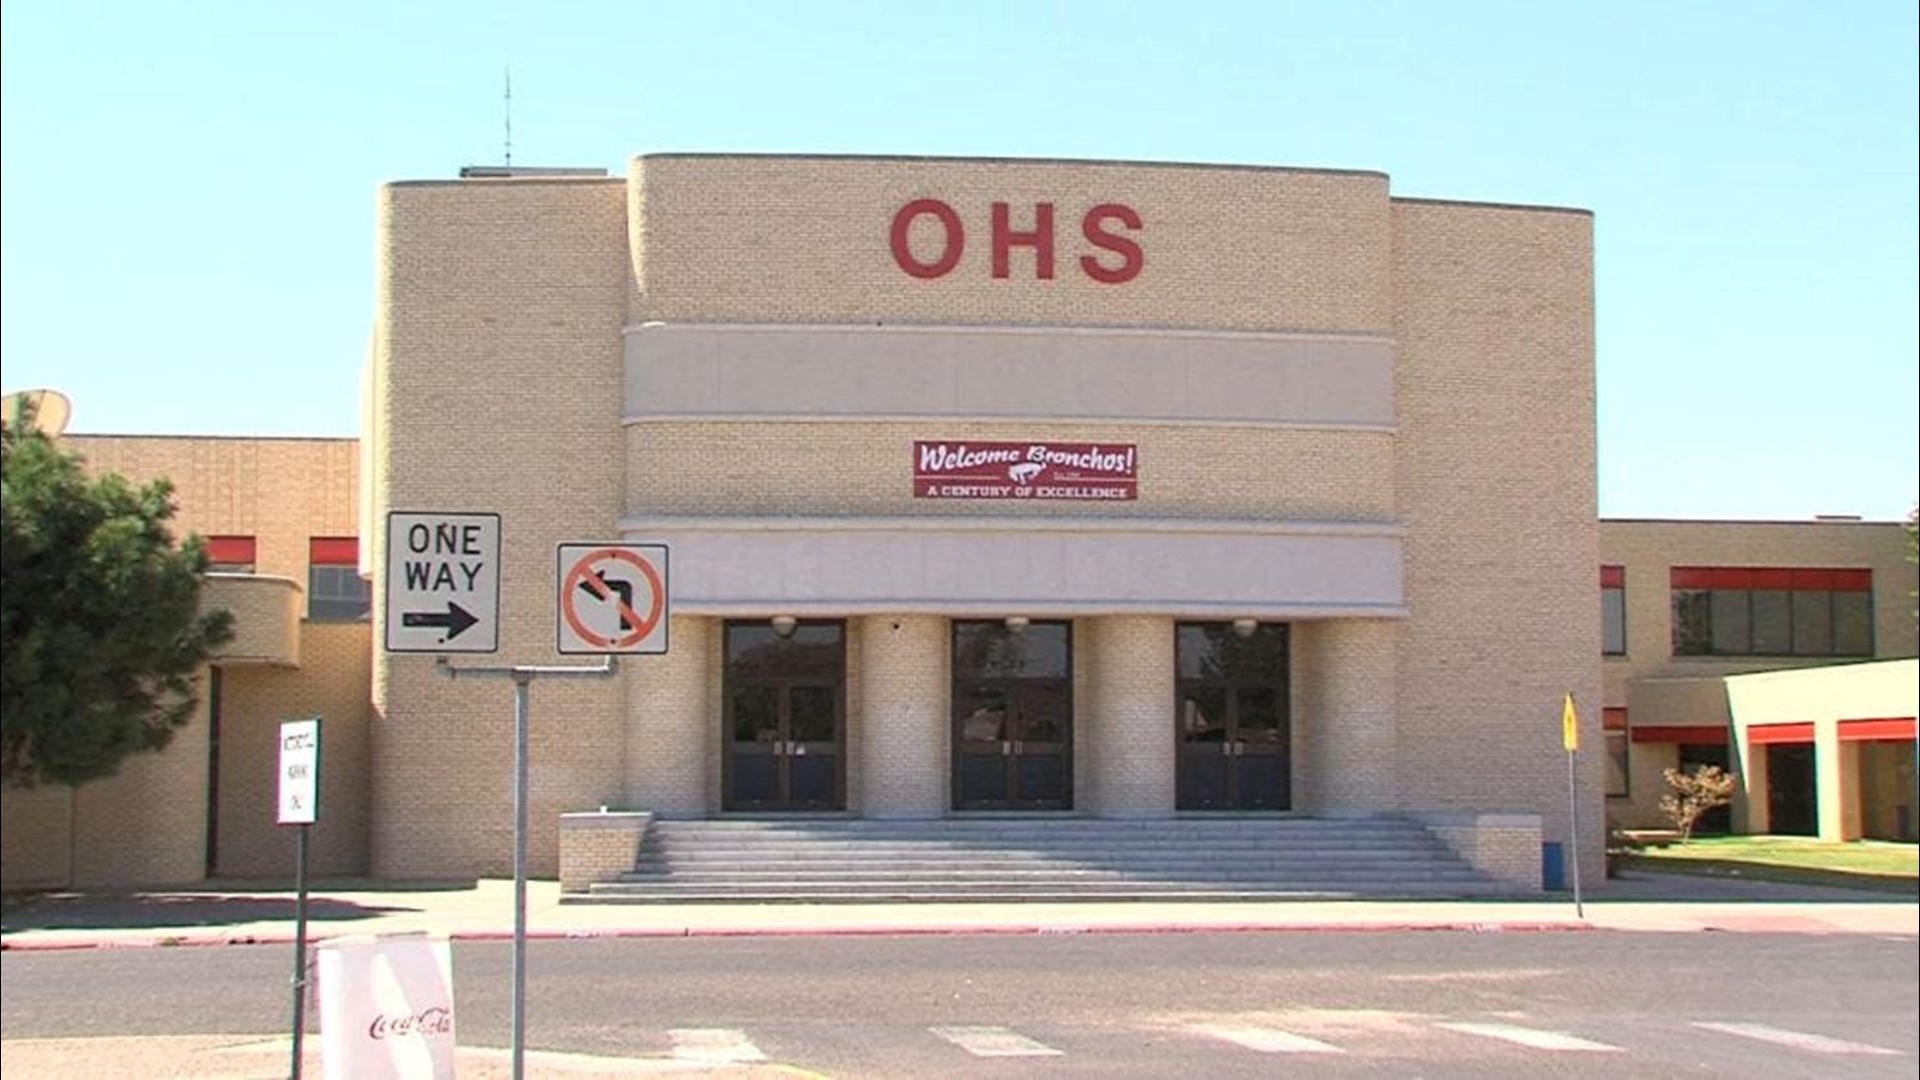 Odessa High School is back in session, but staff and students go on with heavy hearts. The school says resources will be available to staff and students for as long as it's needed.